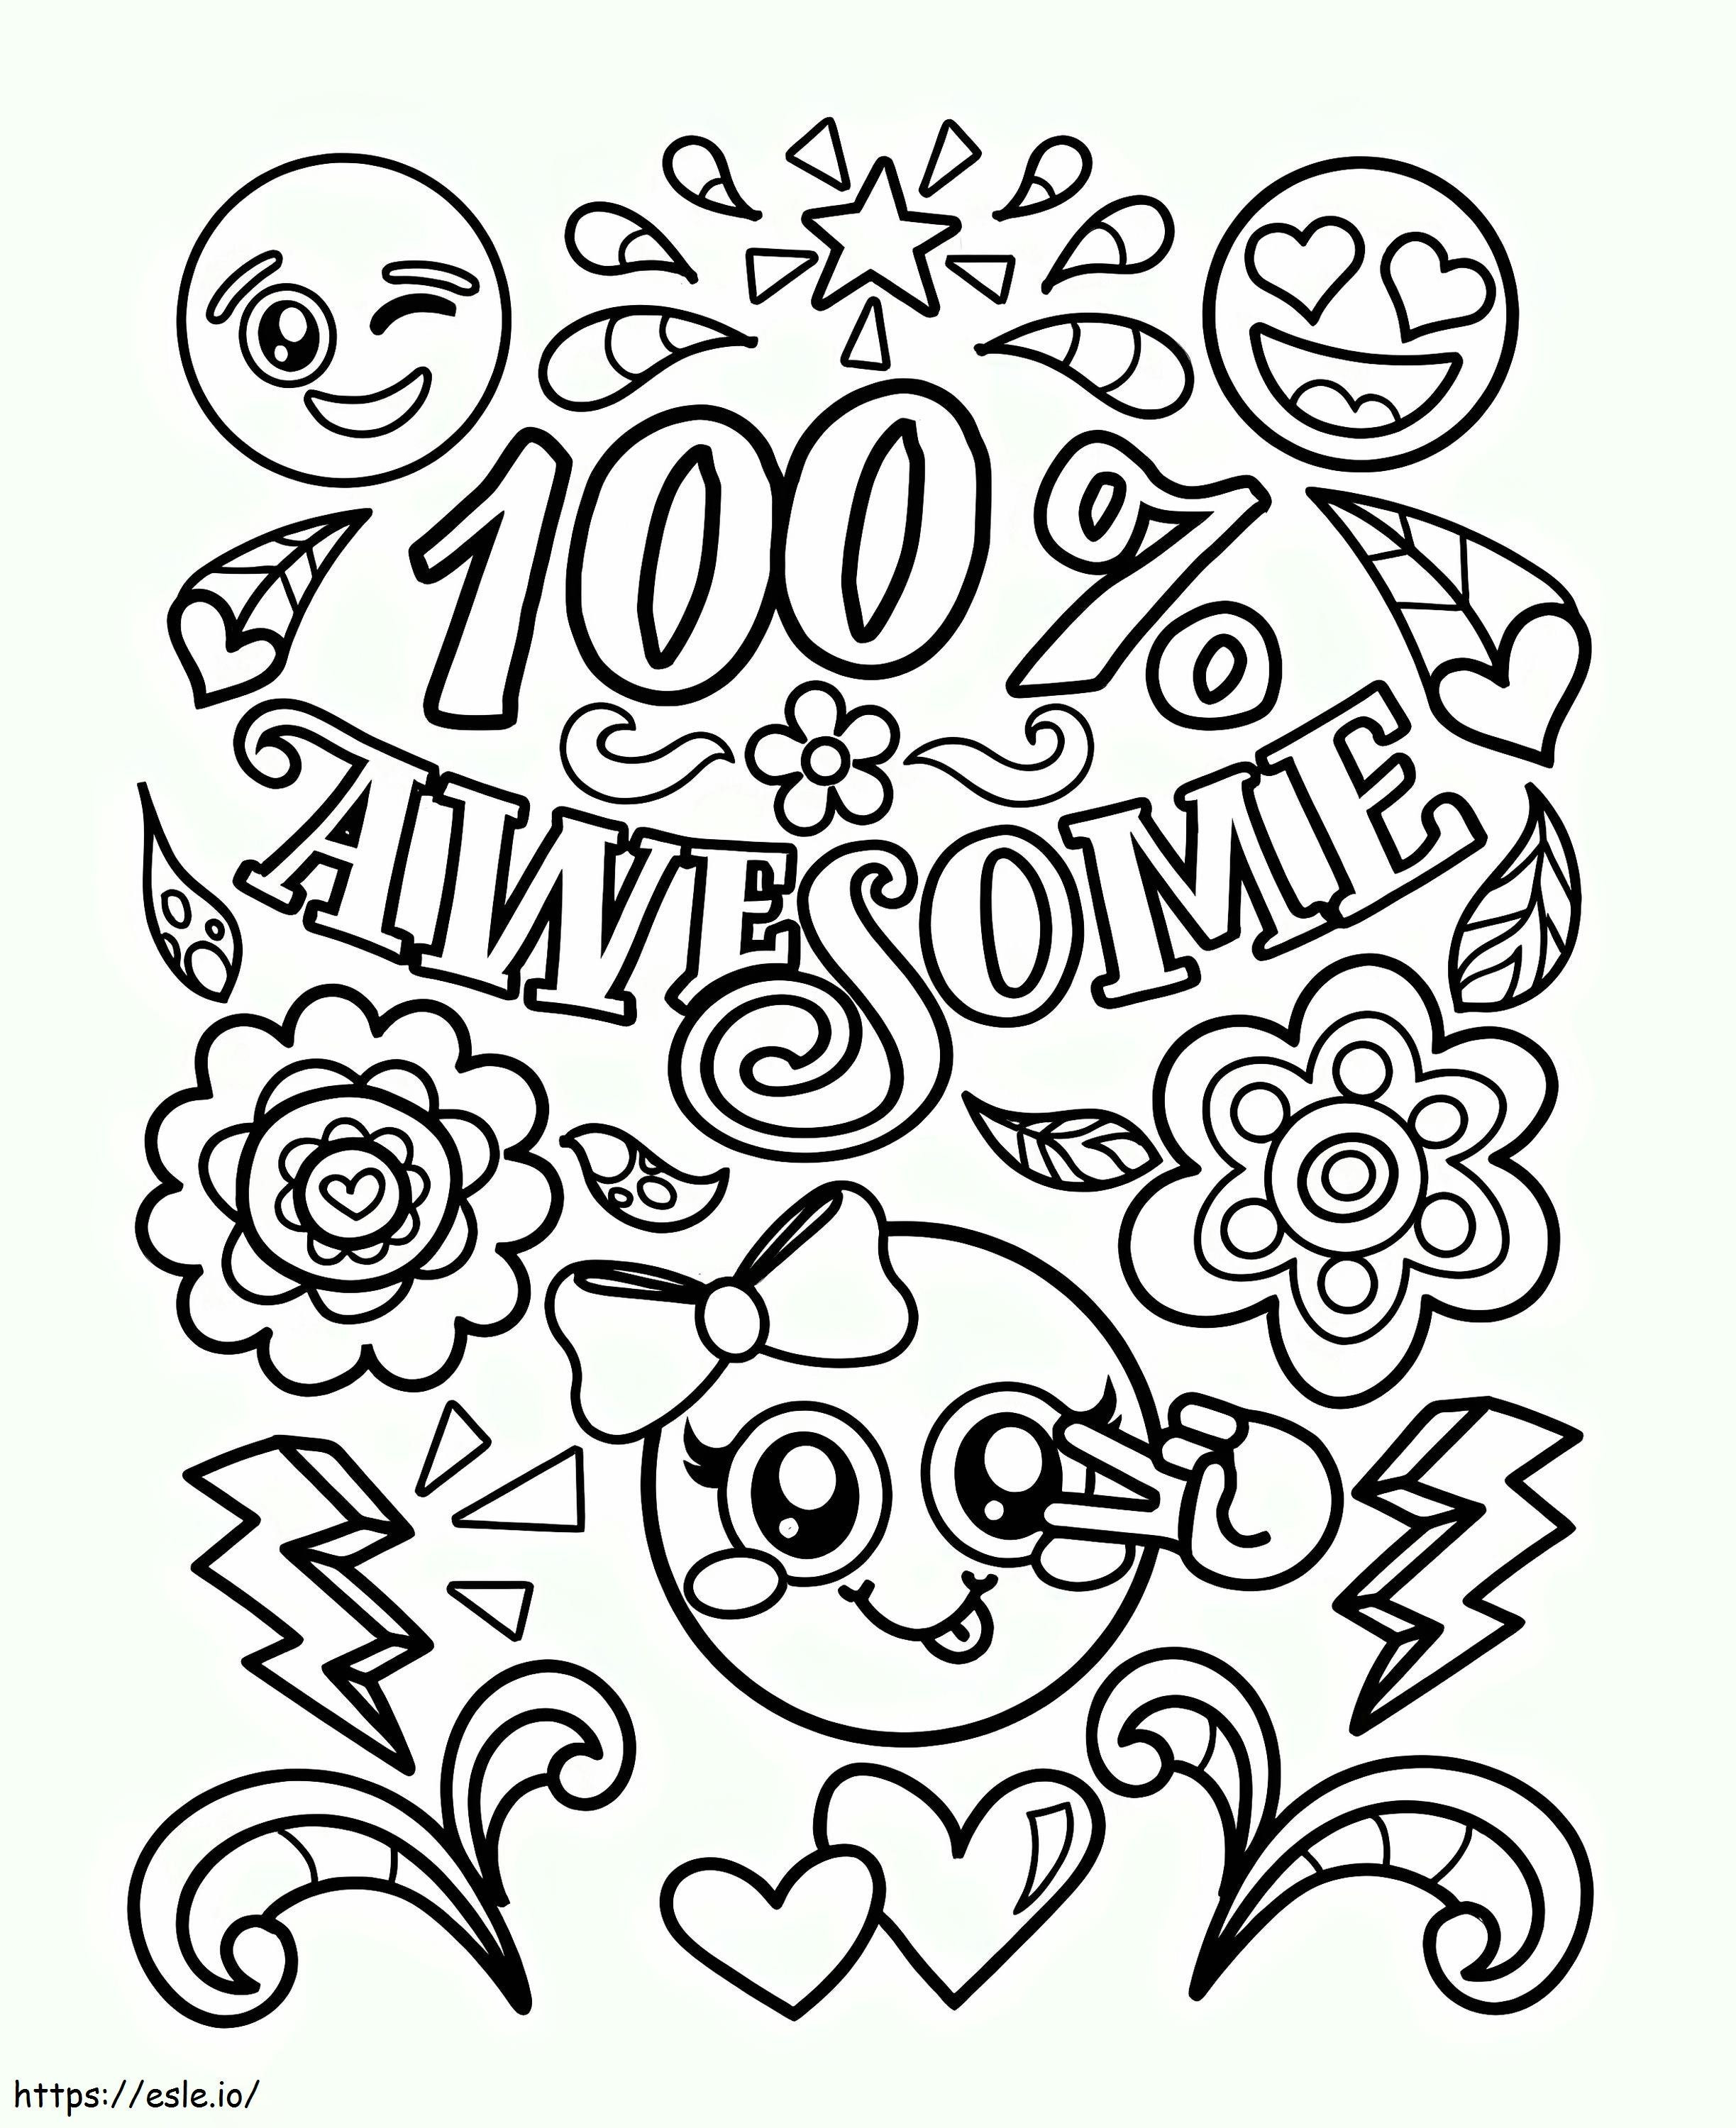 Awesome Emojis coloring page